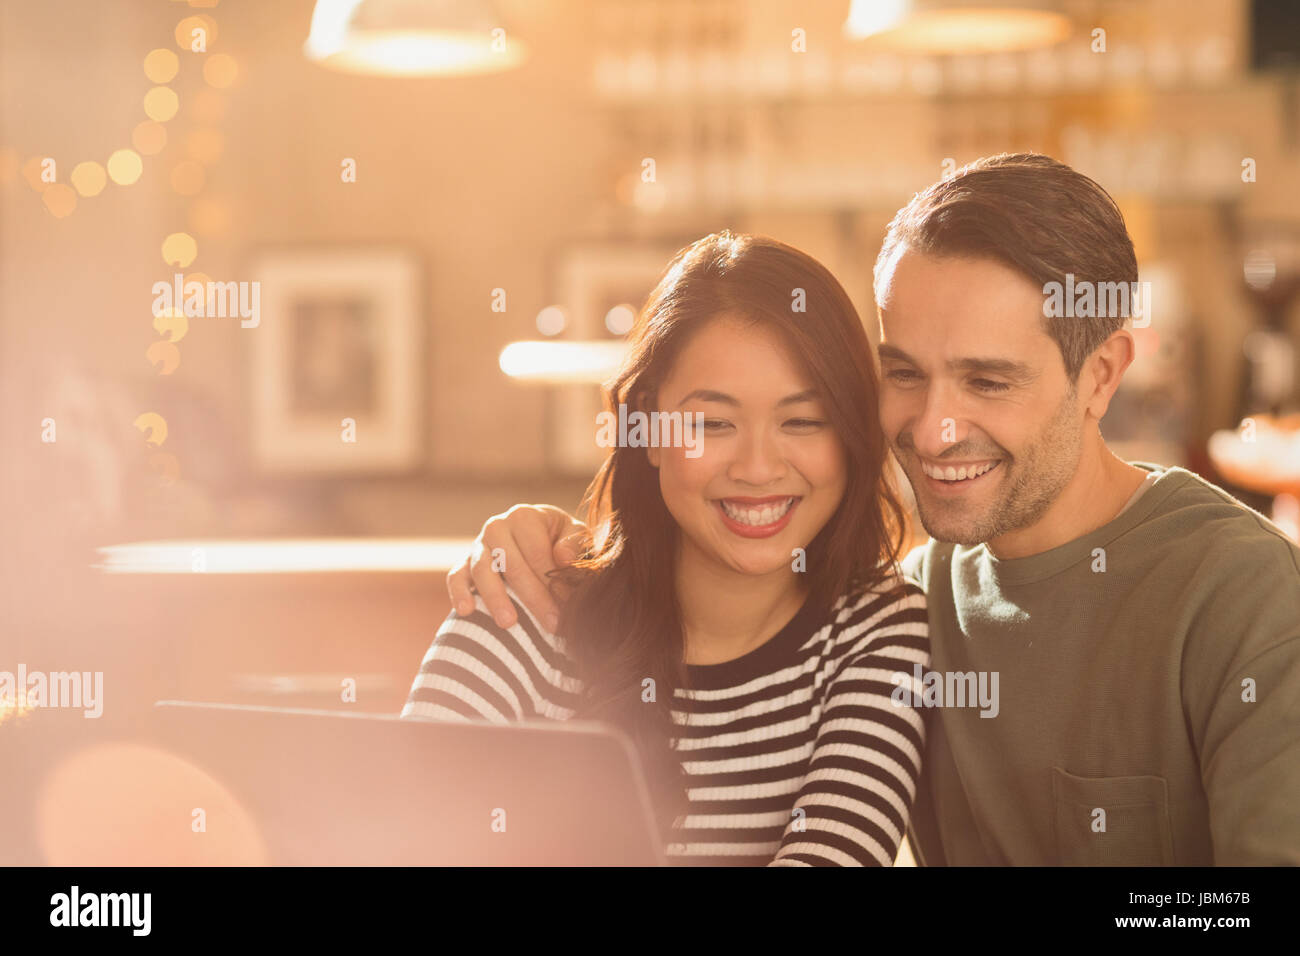 Smiling couple video chatting at laptop in cafe Stock Photo